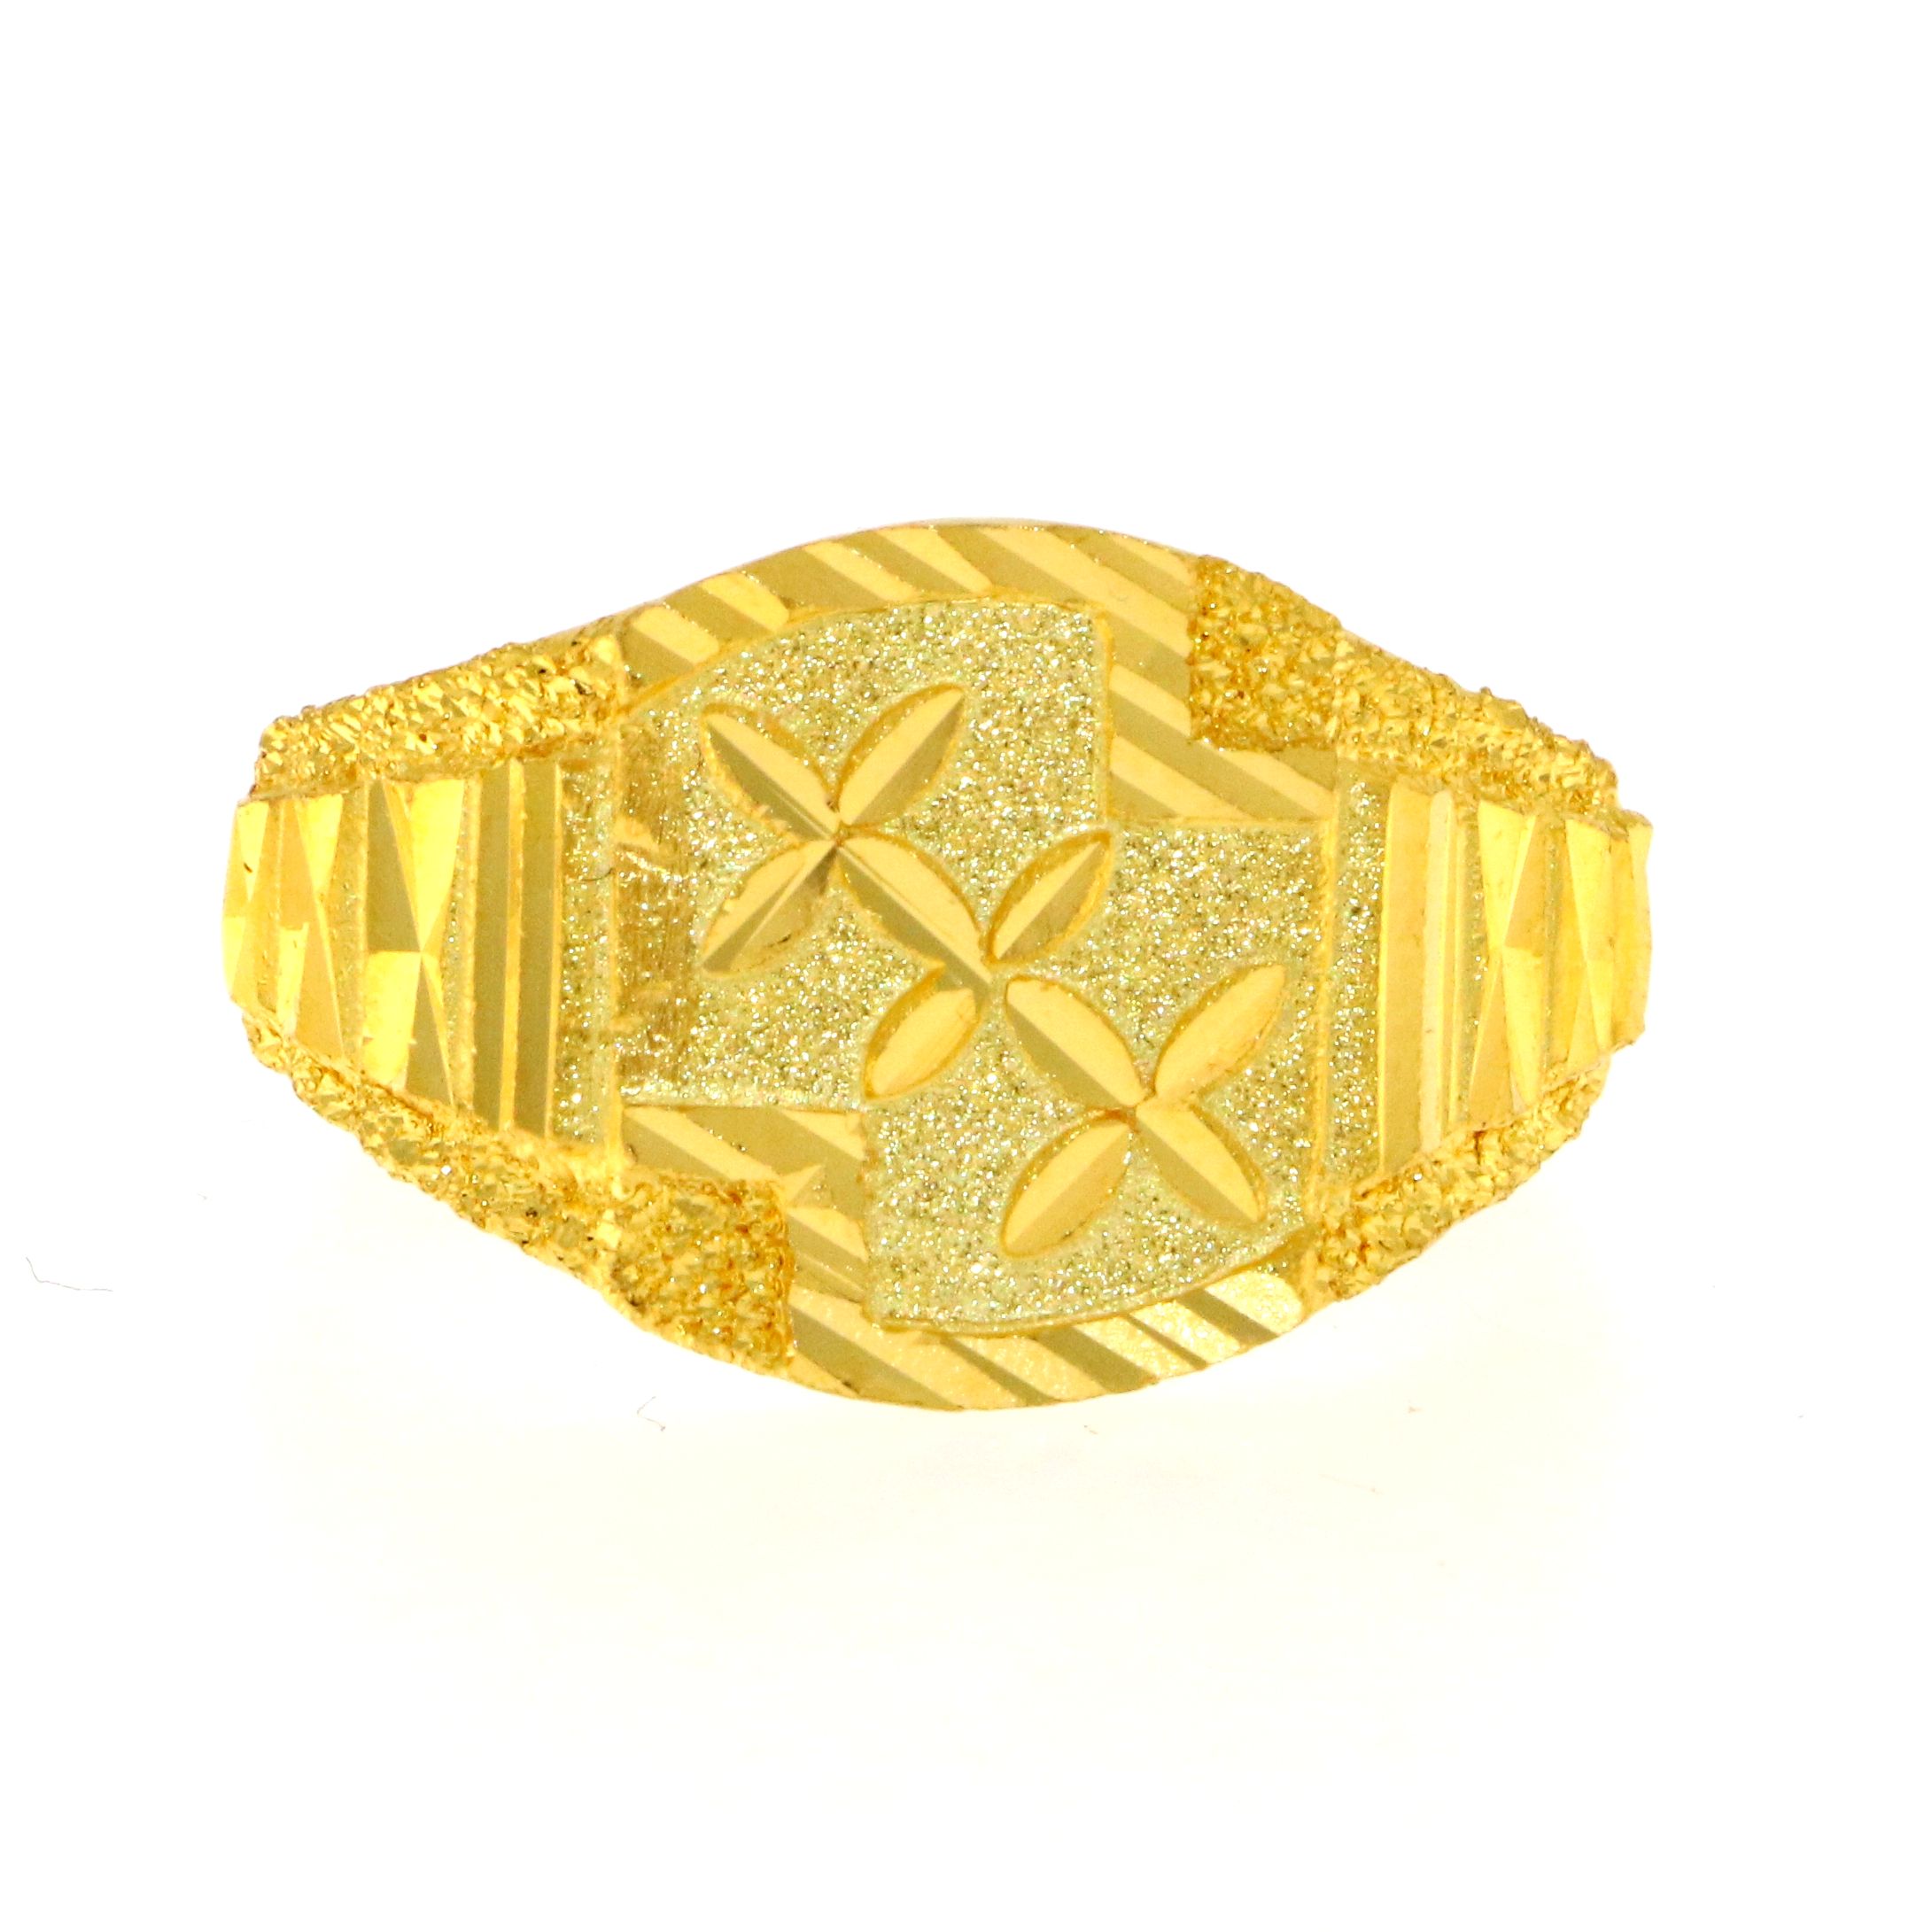 22ct Real Gold Asian/Indian/Pakistani Style Ring